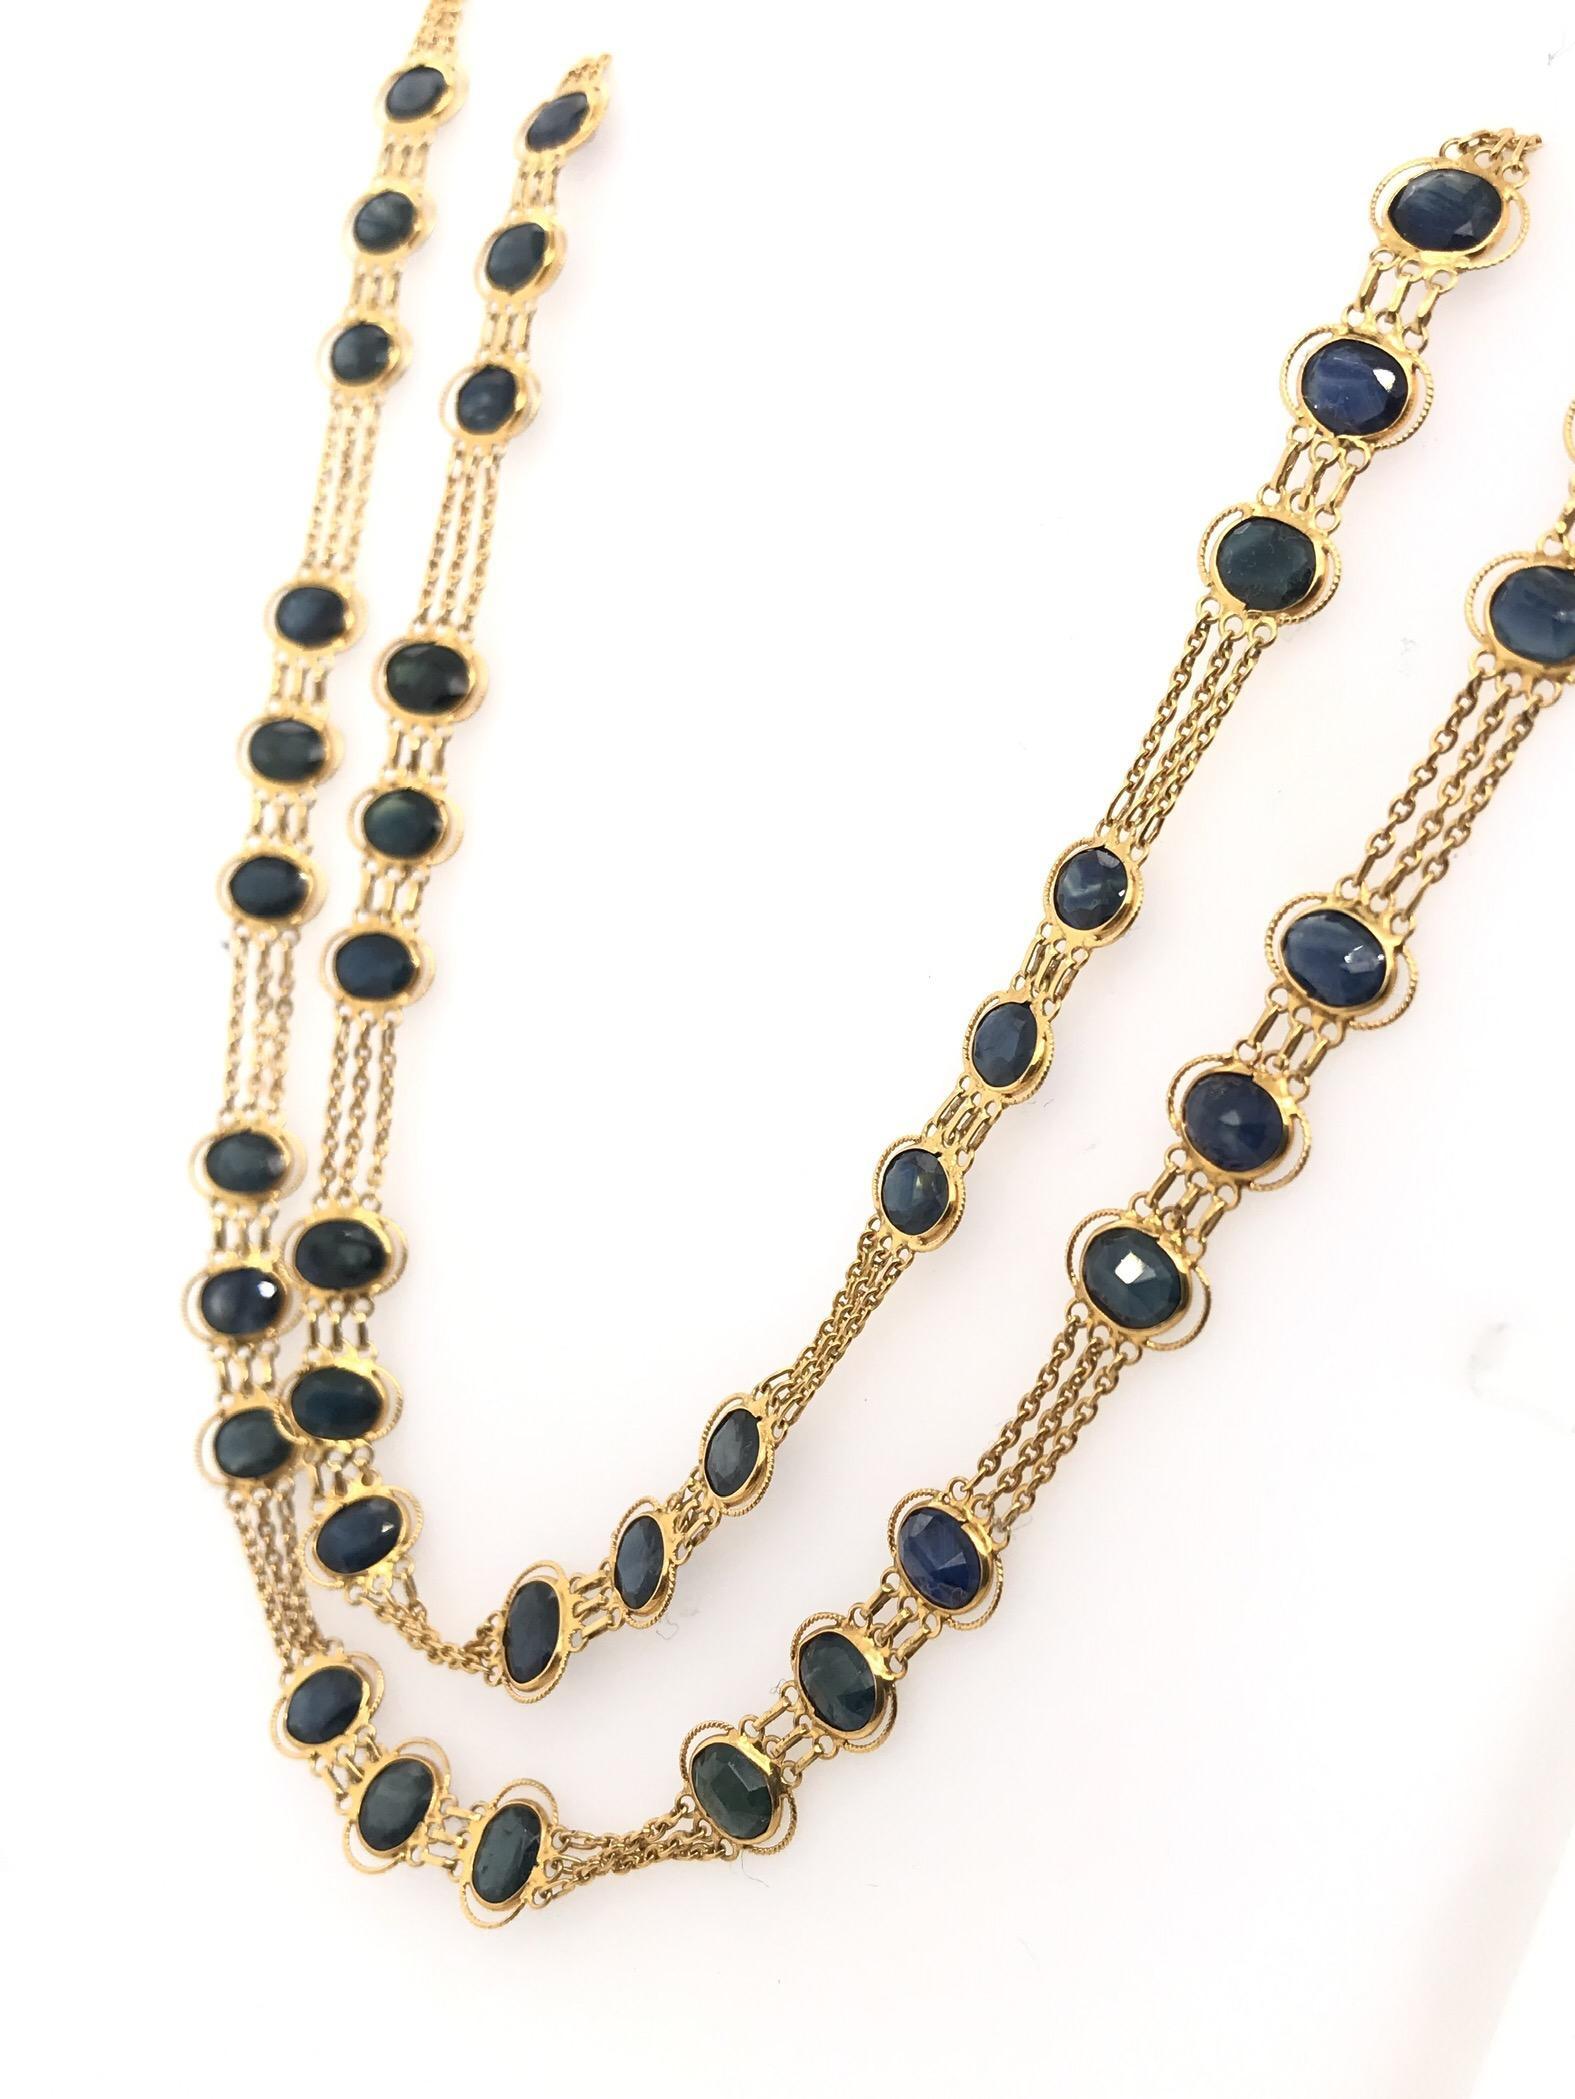 Oval Cut Contemporary Estate Bohemian Style Triple Strand Sapphire Necklace For Sale